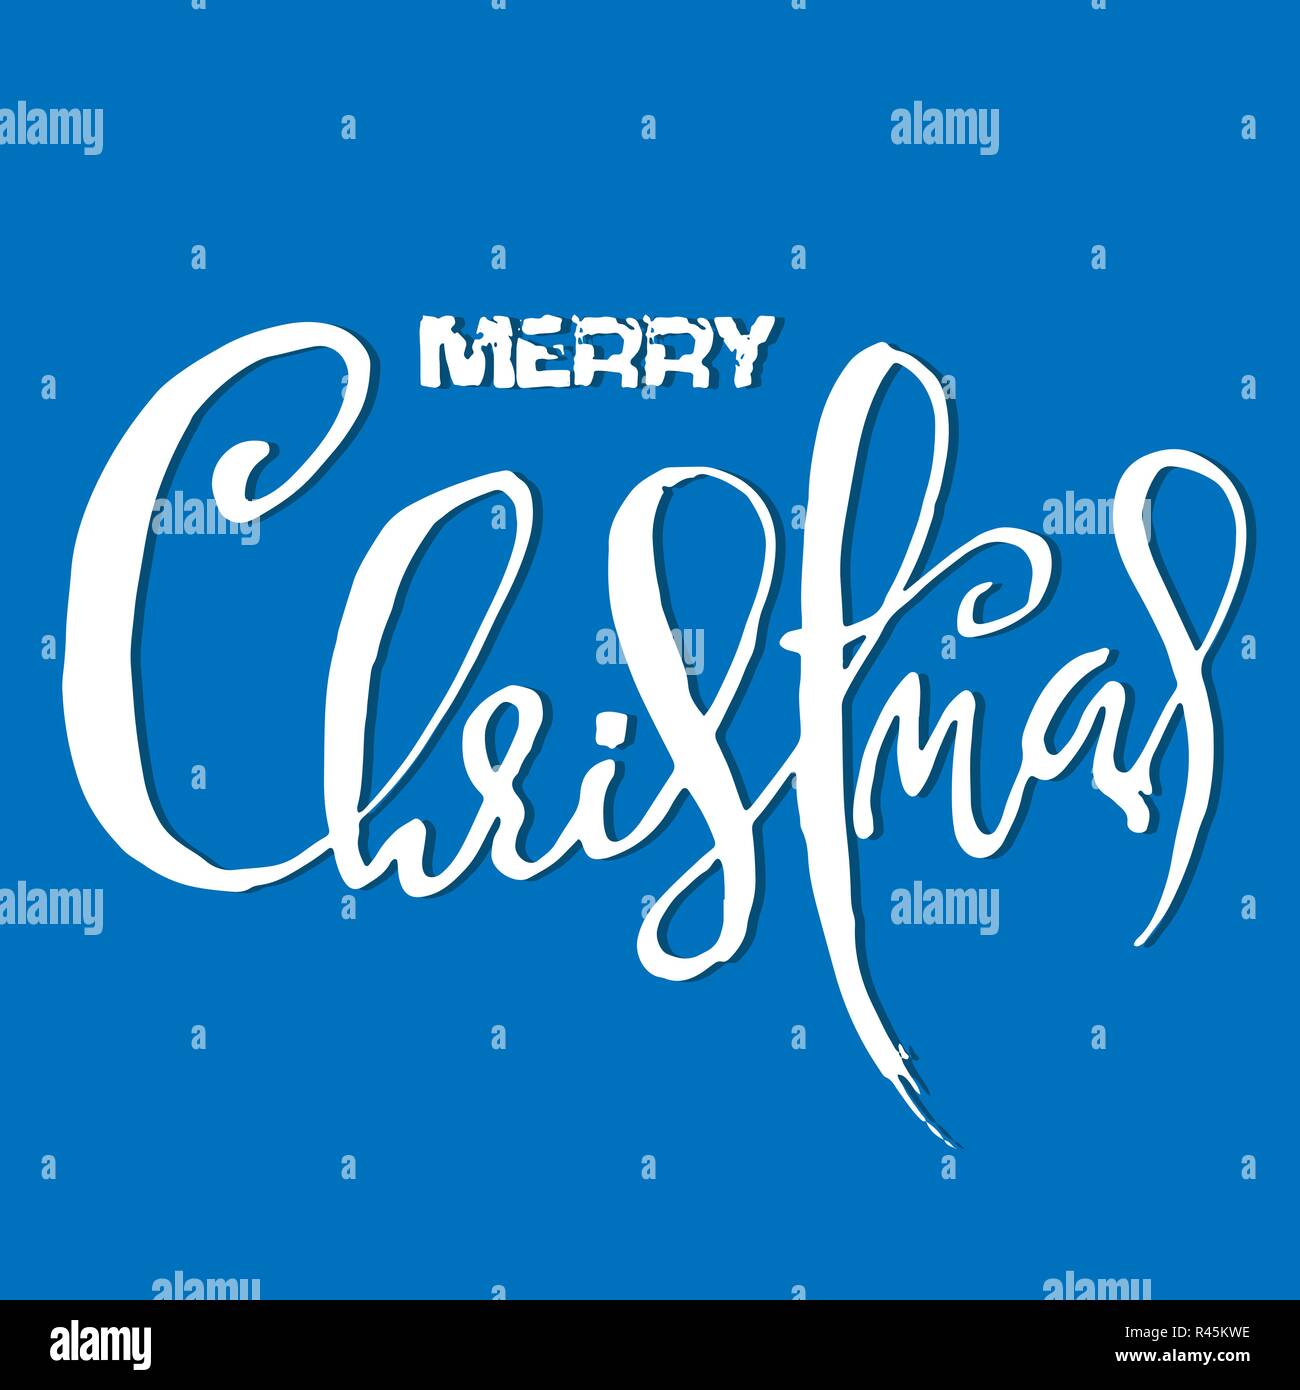 Merry Christmas Holiday Modern Dry Brush Ink Lettering For Greeting Card Vector Illustration